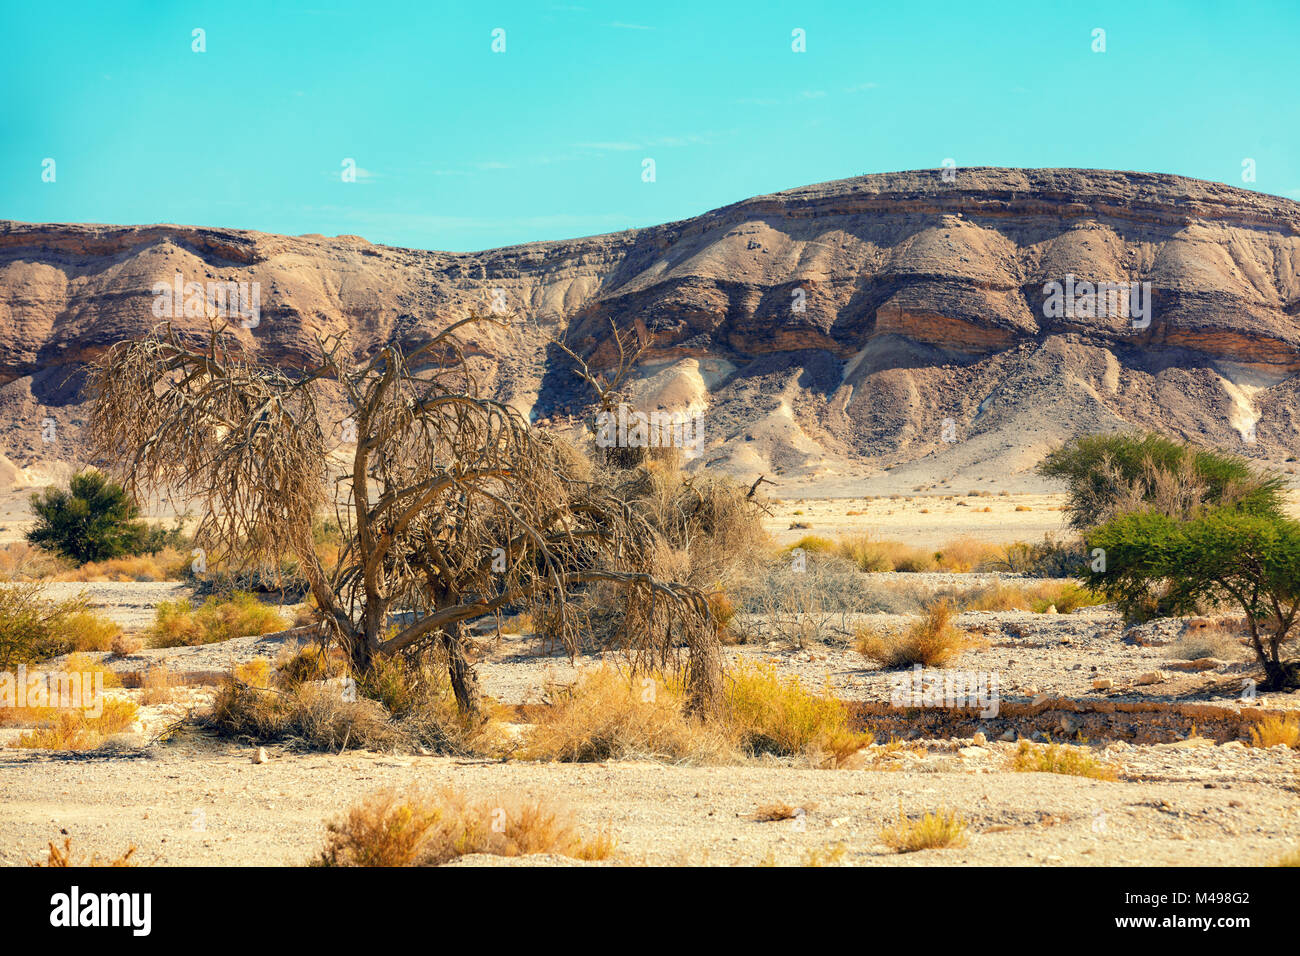 Landscape of the desert, dry riverbed. Trees grow along the dry riverbed Stock Photo